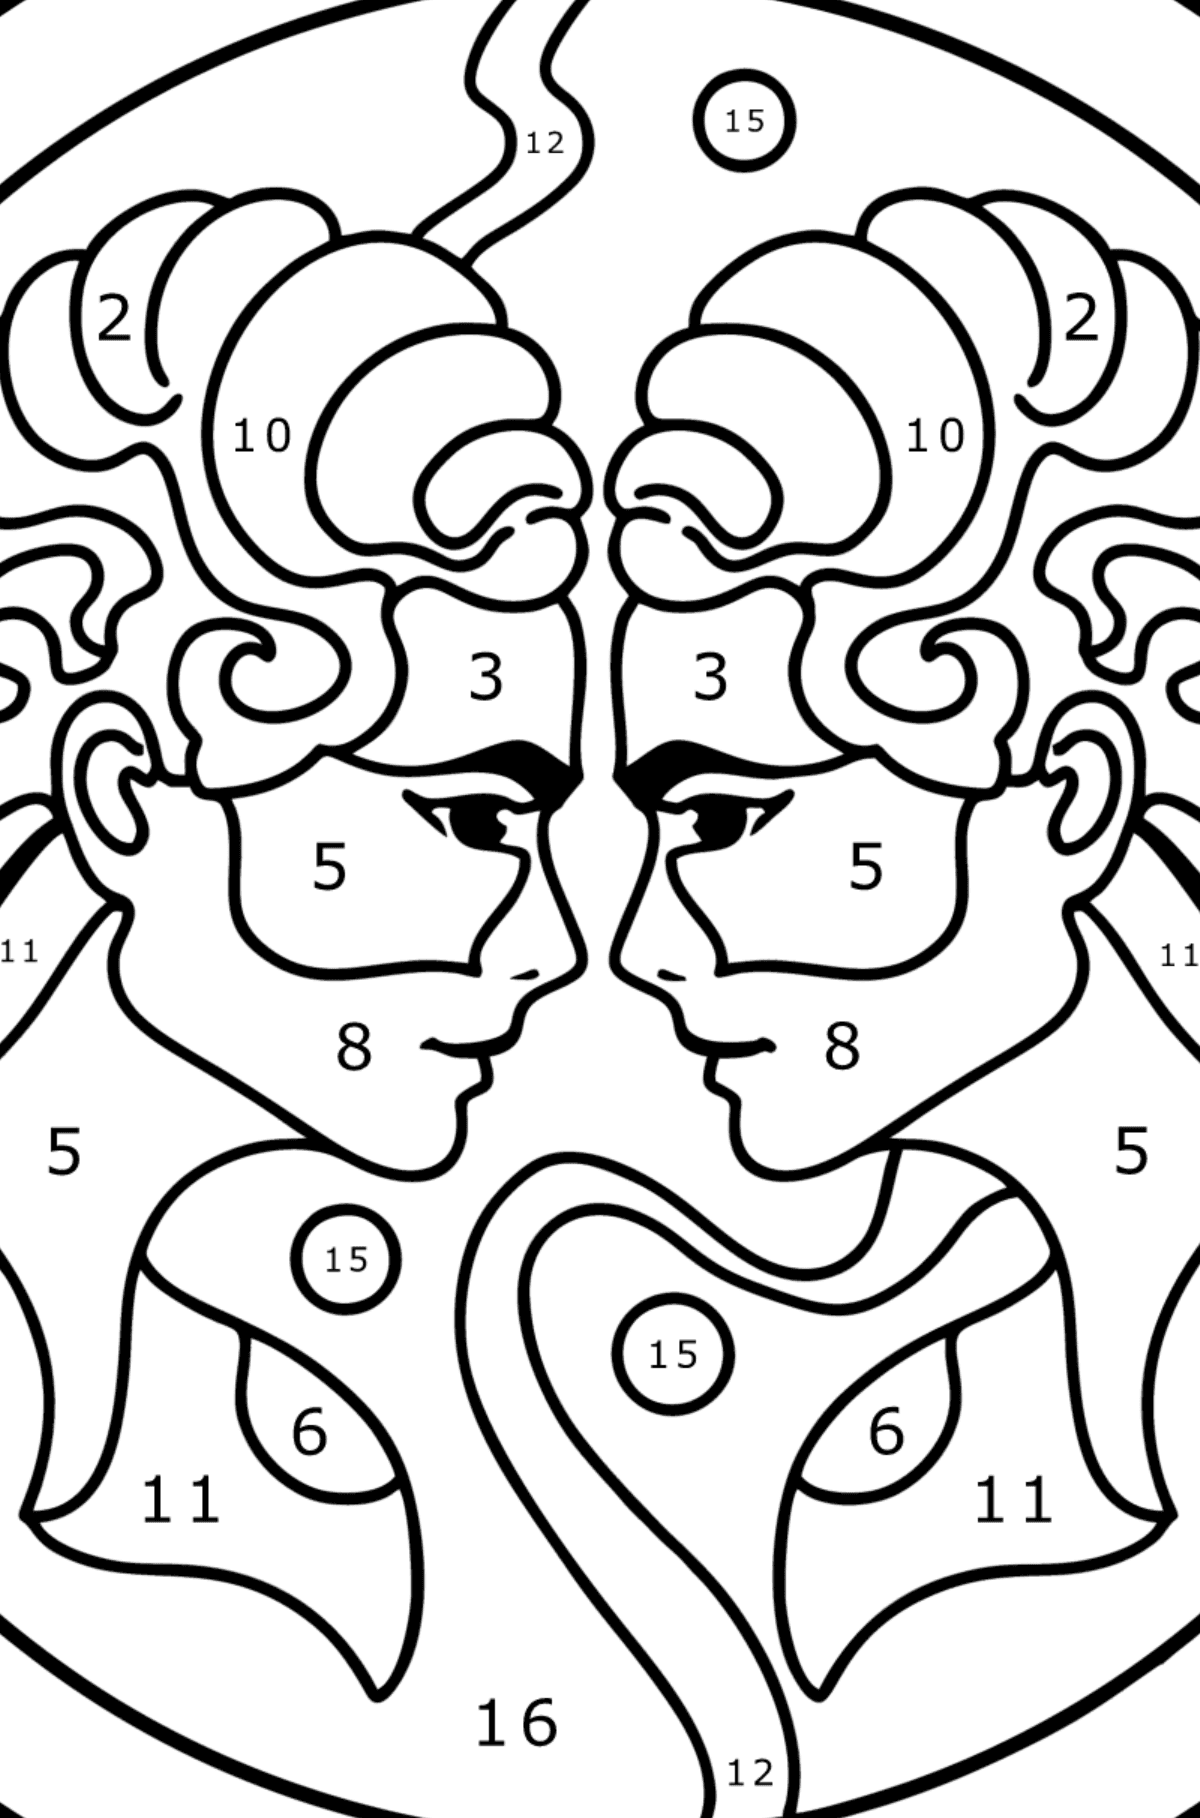 Coloring page for kids - Gemini zodiac sign - Coloring by Numbers for Kids